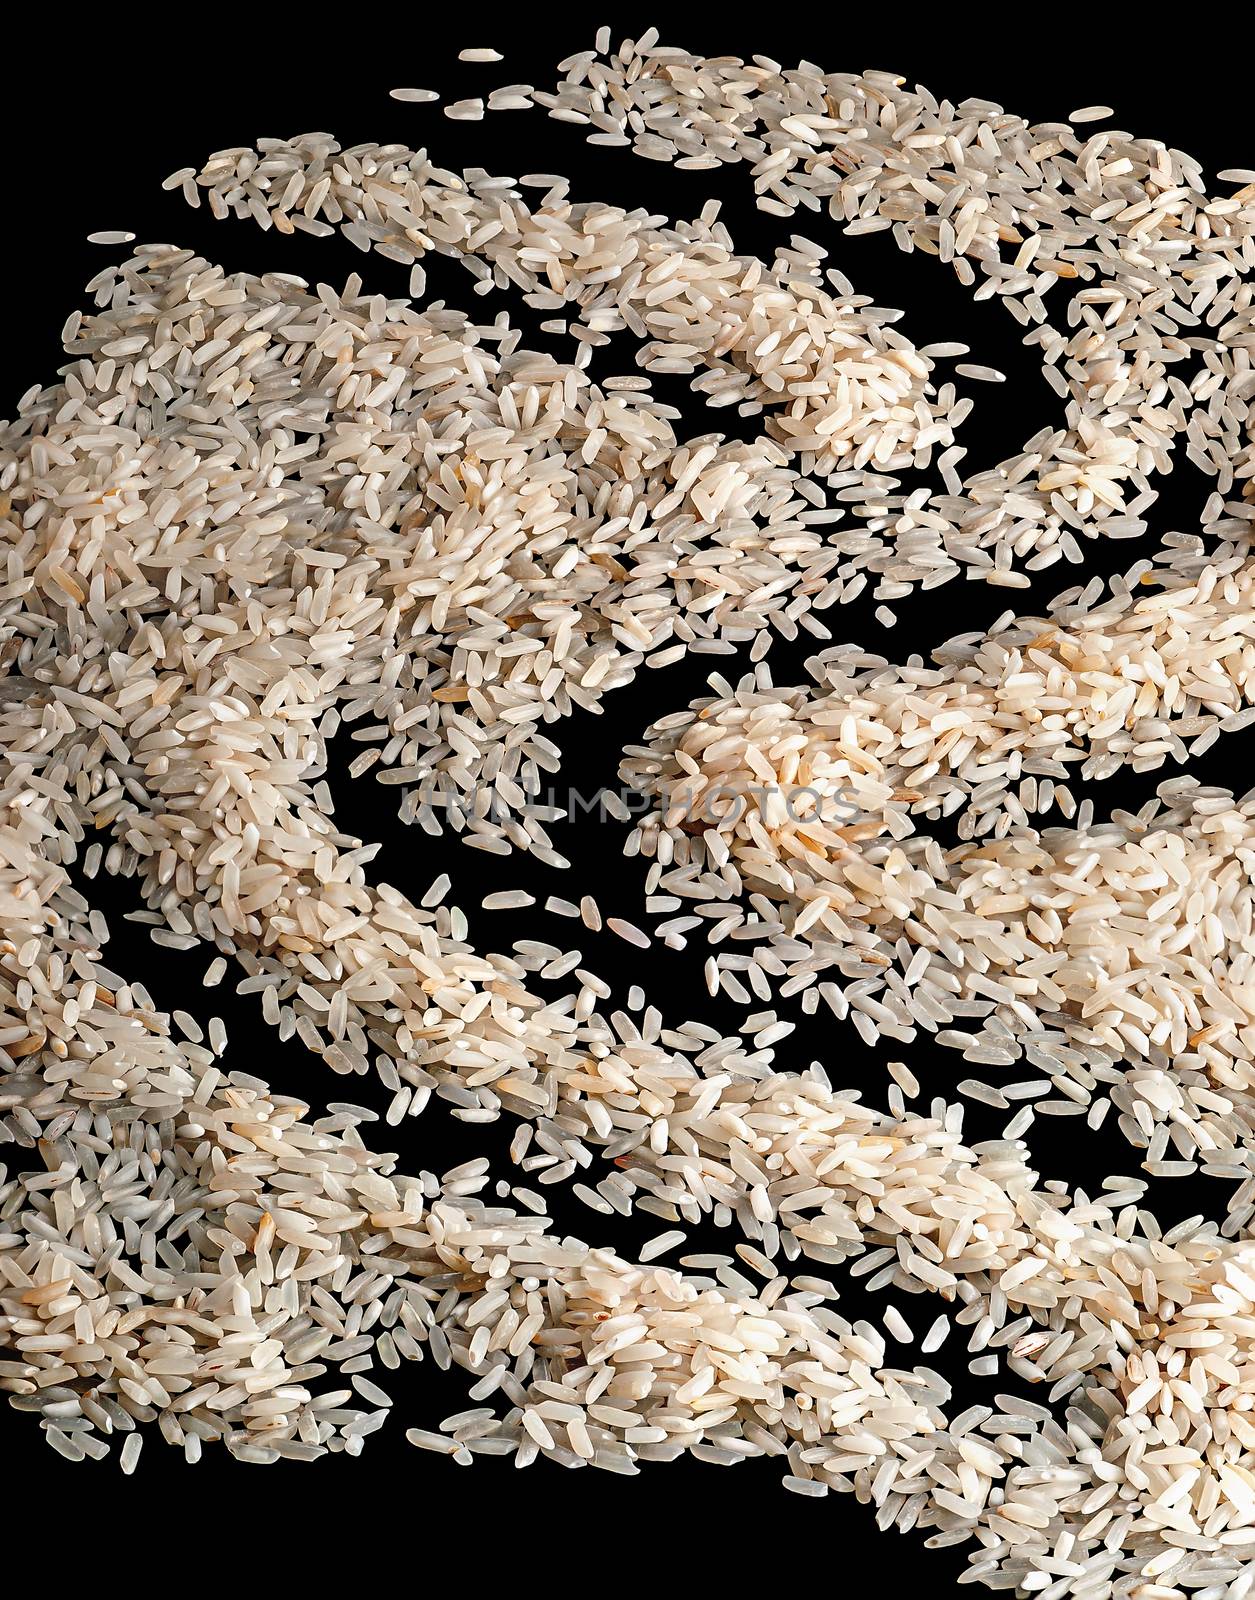 Abstrack background scattered dry rice on black